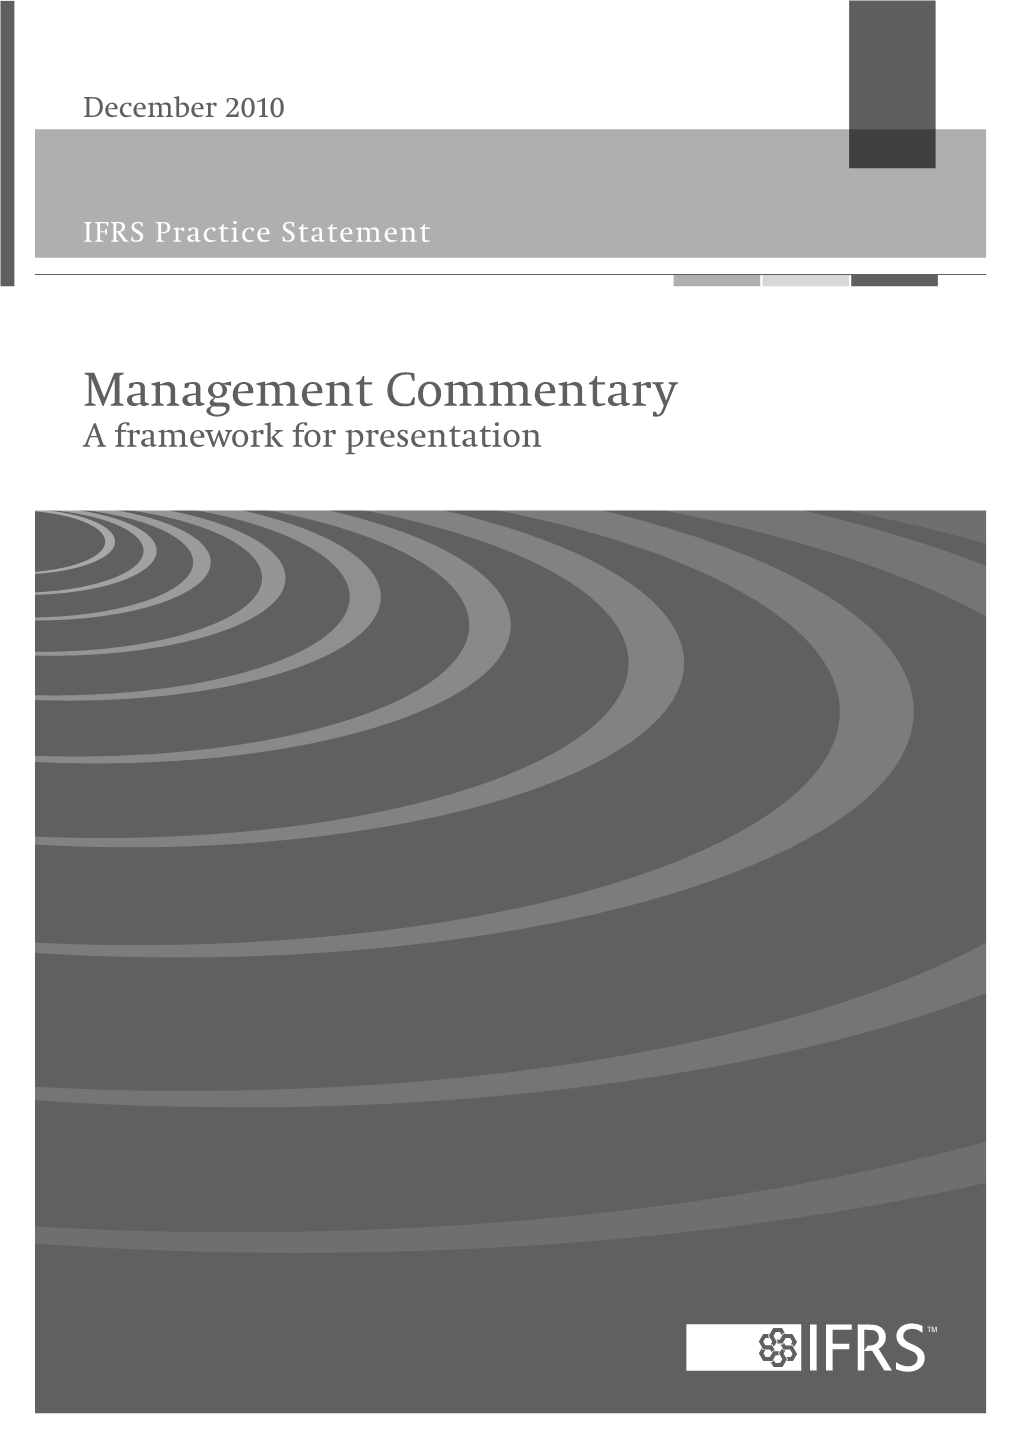 IFRS Practice Statement Management Commentary